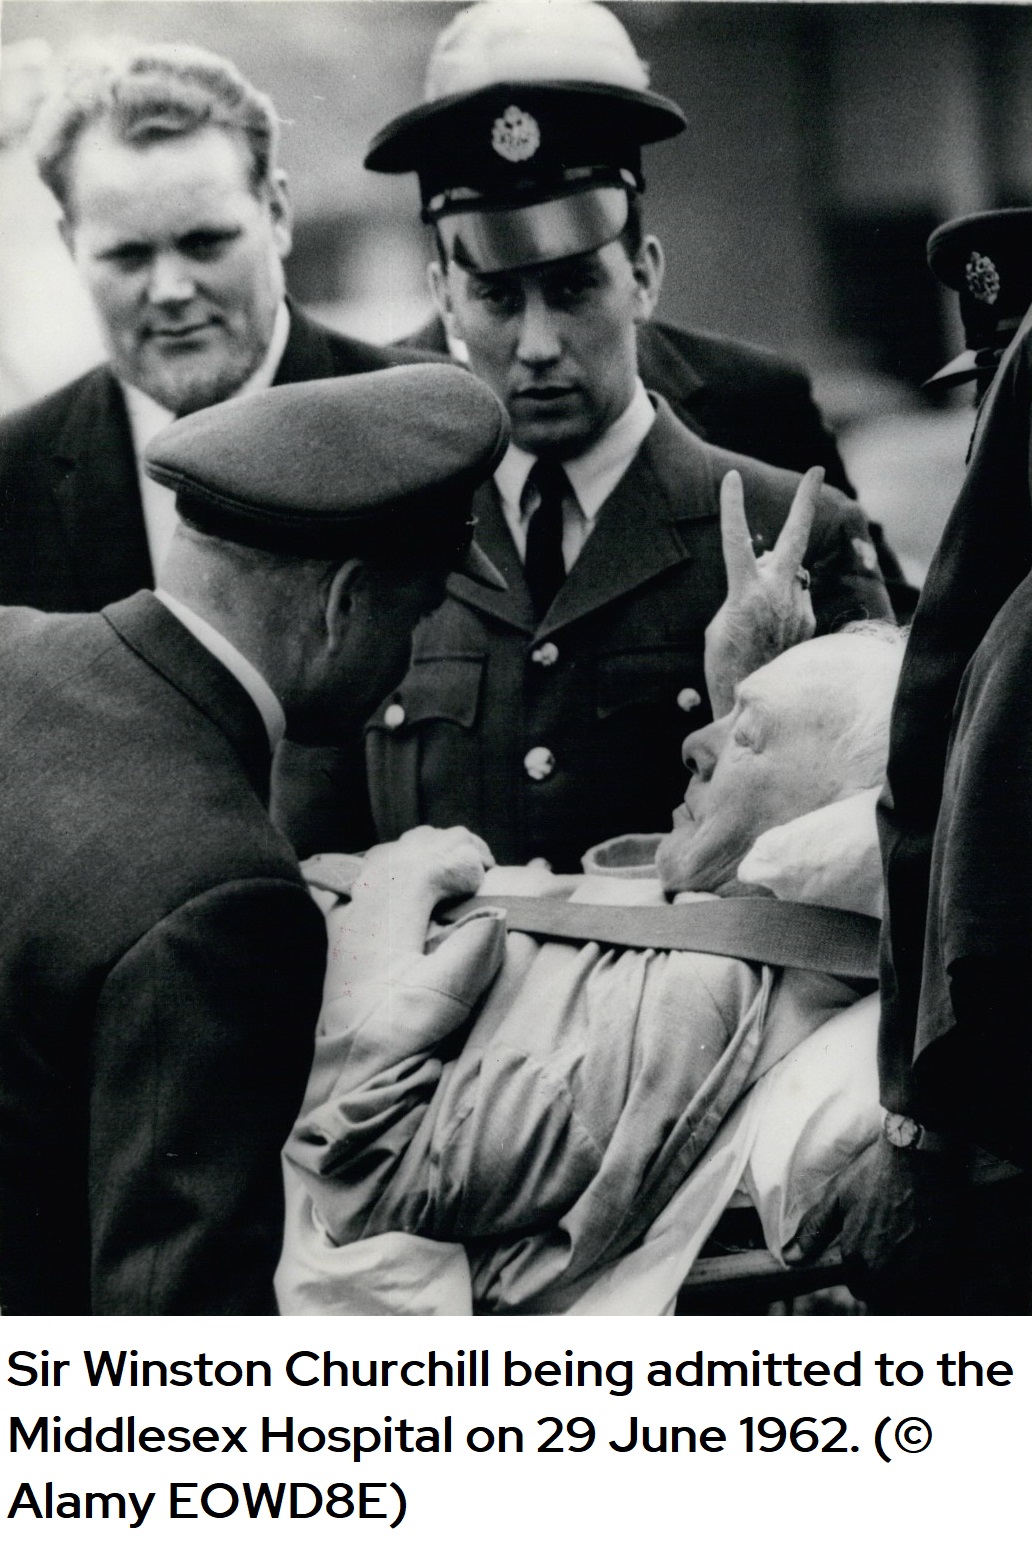 Sir Winston Churchill admitted to the Middlesex Hospital on 29th June 1962